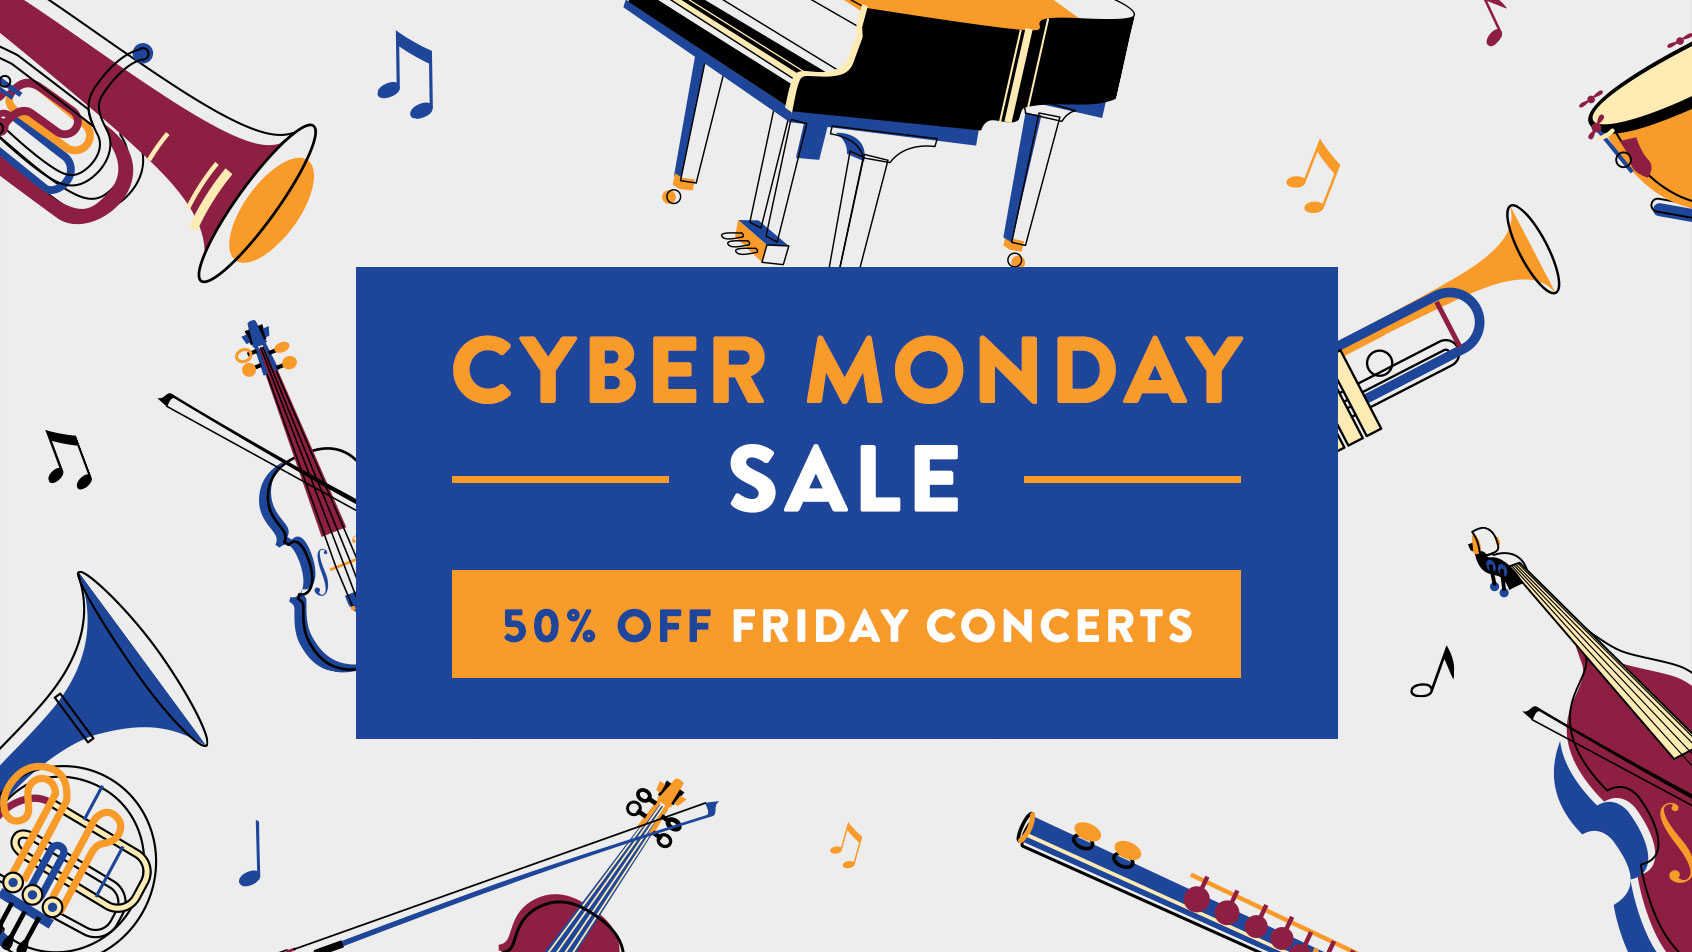 Cyber Monday Sale: 50% Off Friday Concerts